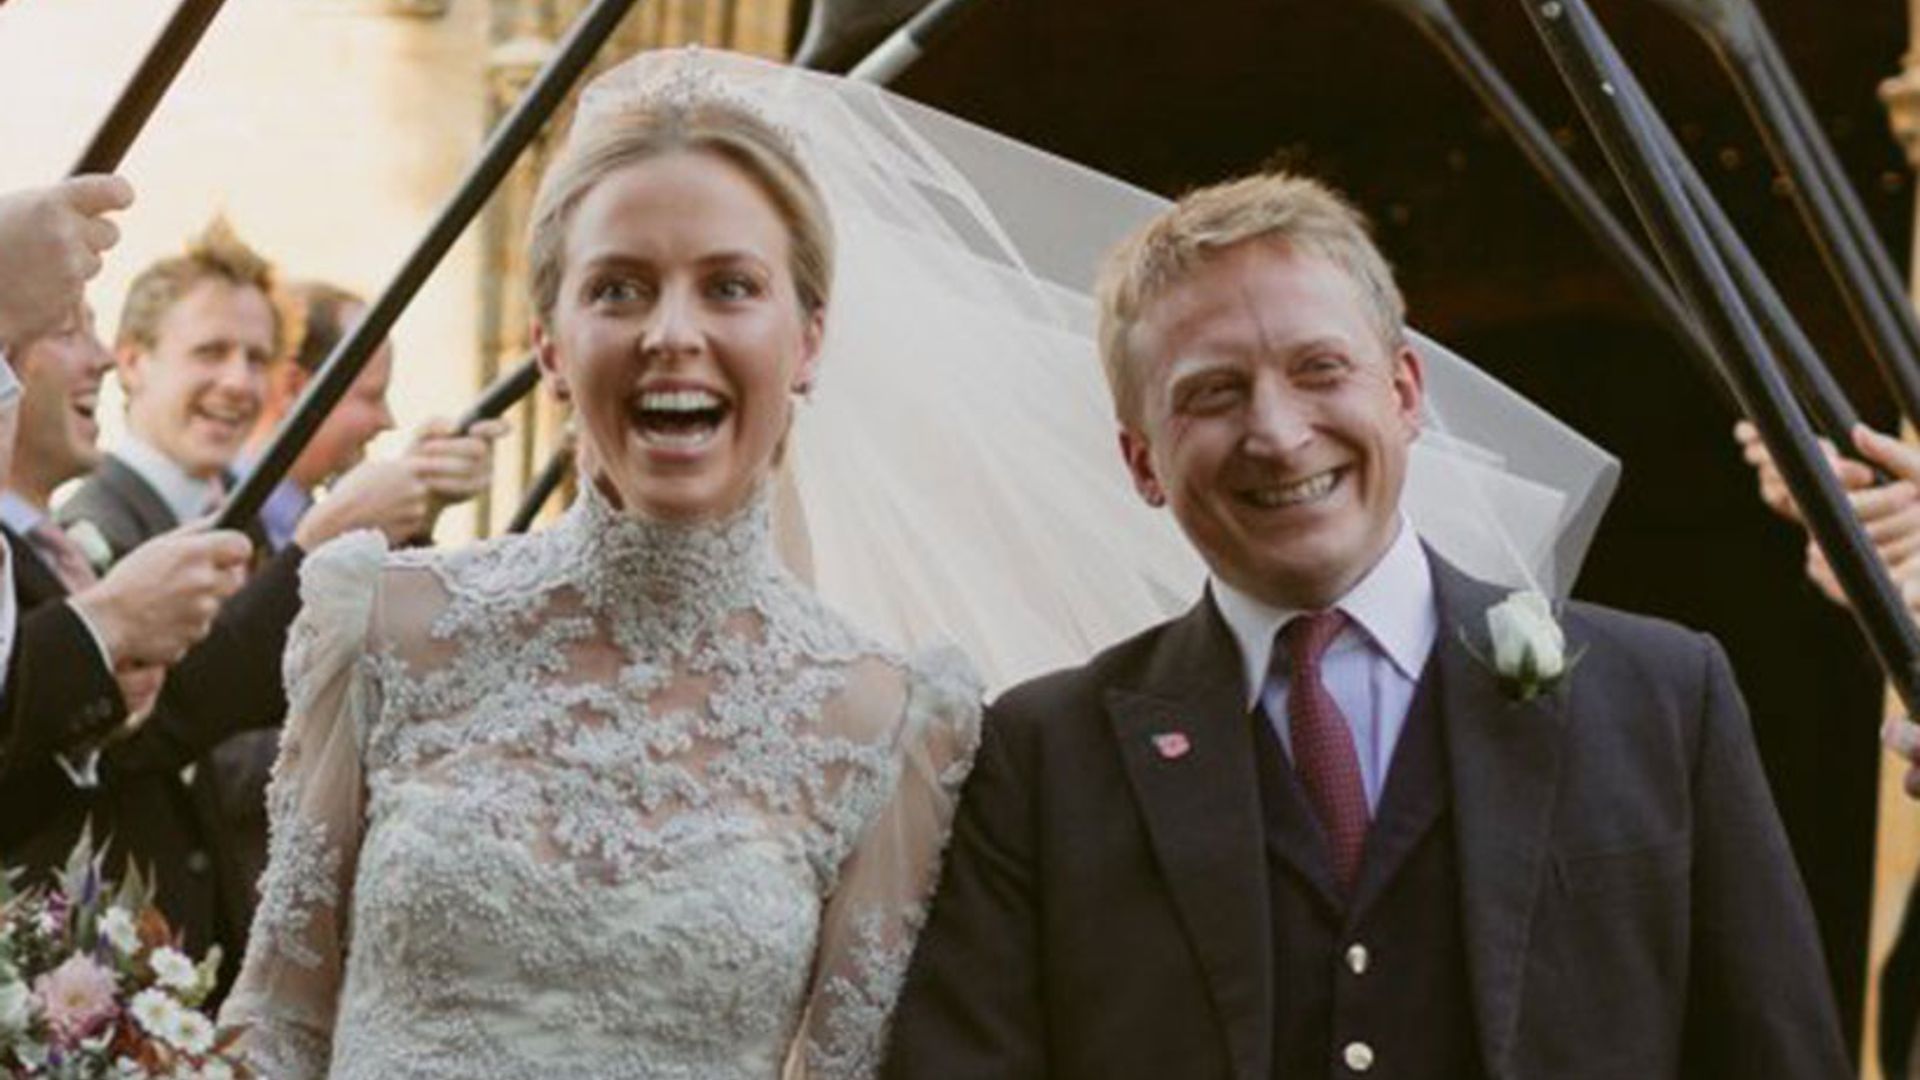 Prince Williams Friend Oliver Hicks Marries Girlfriend Rose Kingscote 